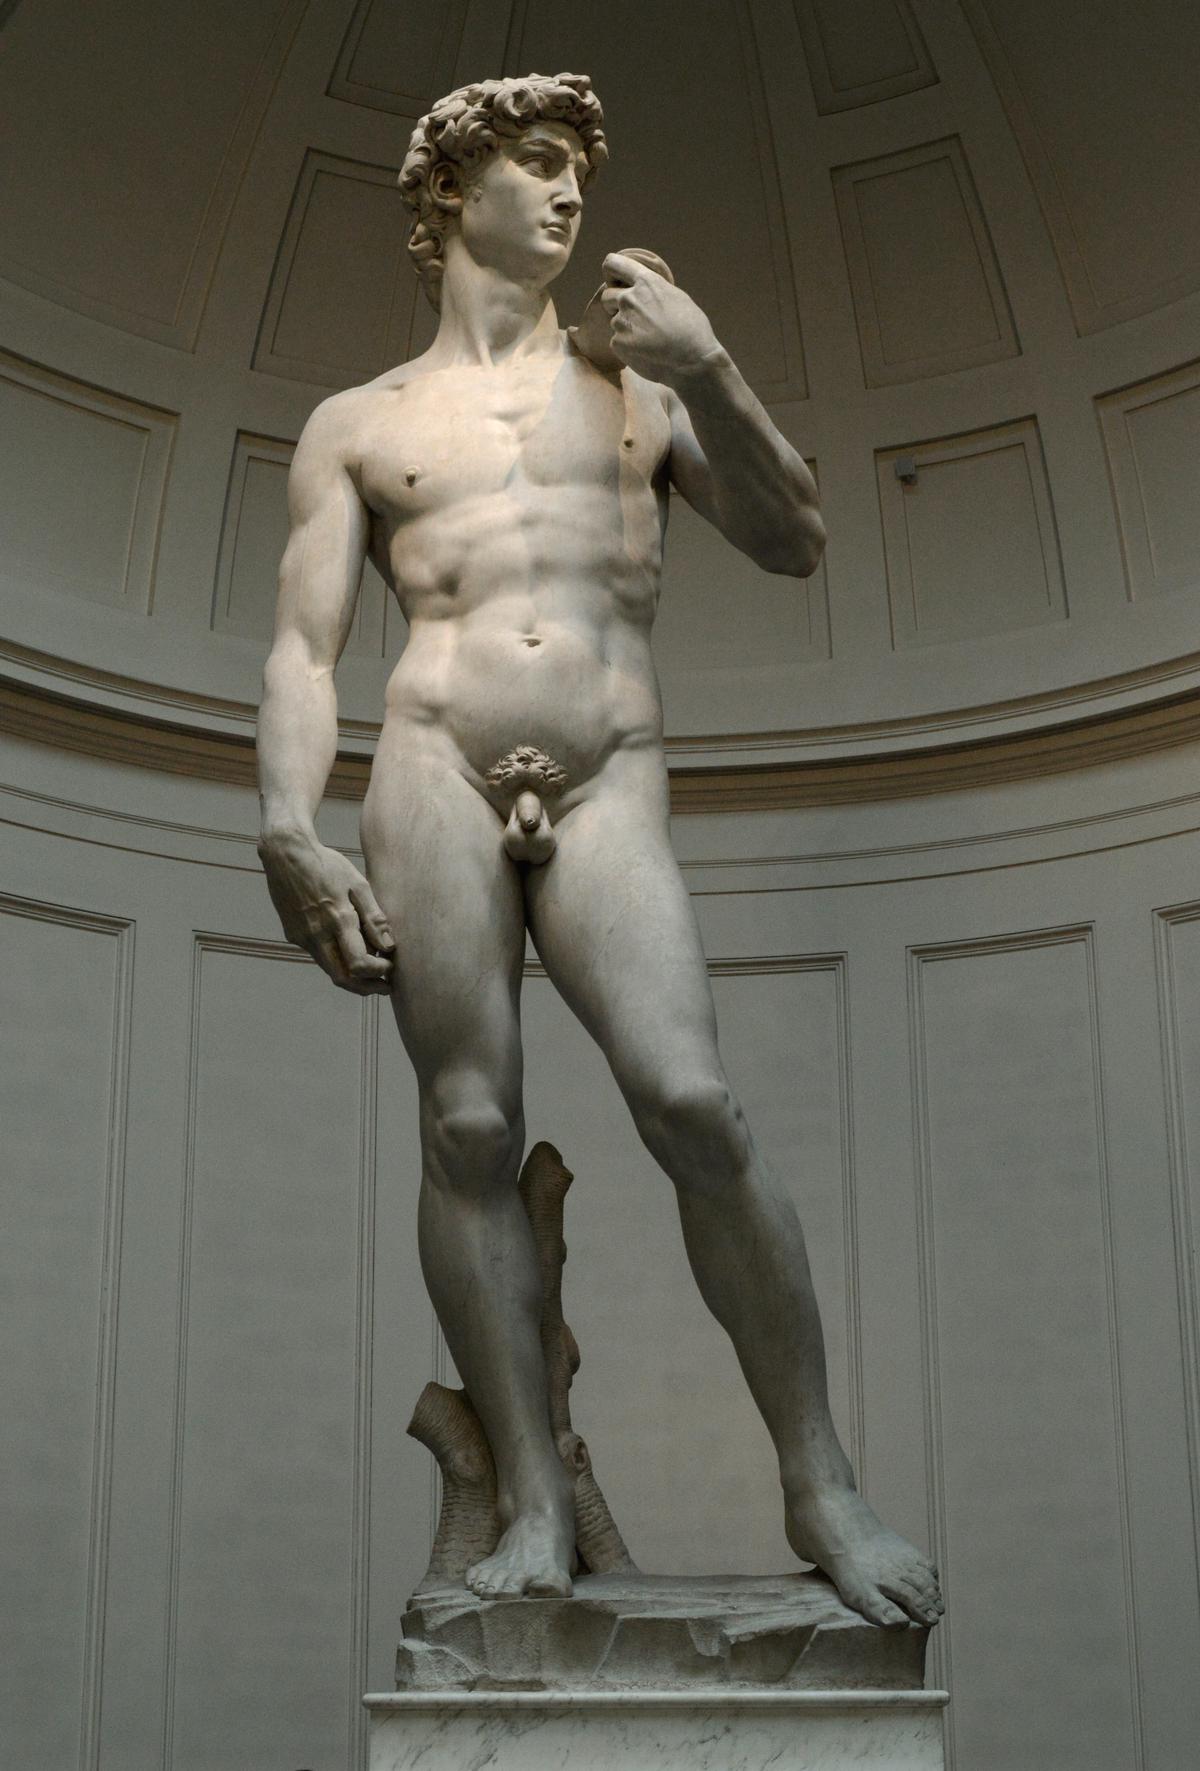 Image depicting the influence of Donatello on Michelangelo's art